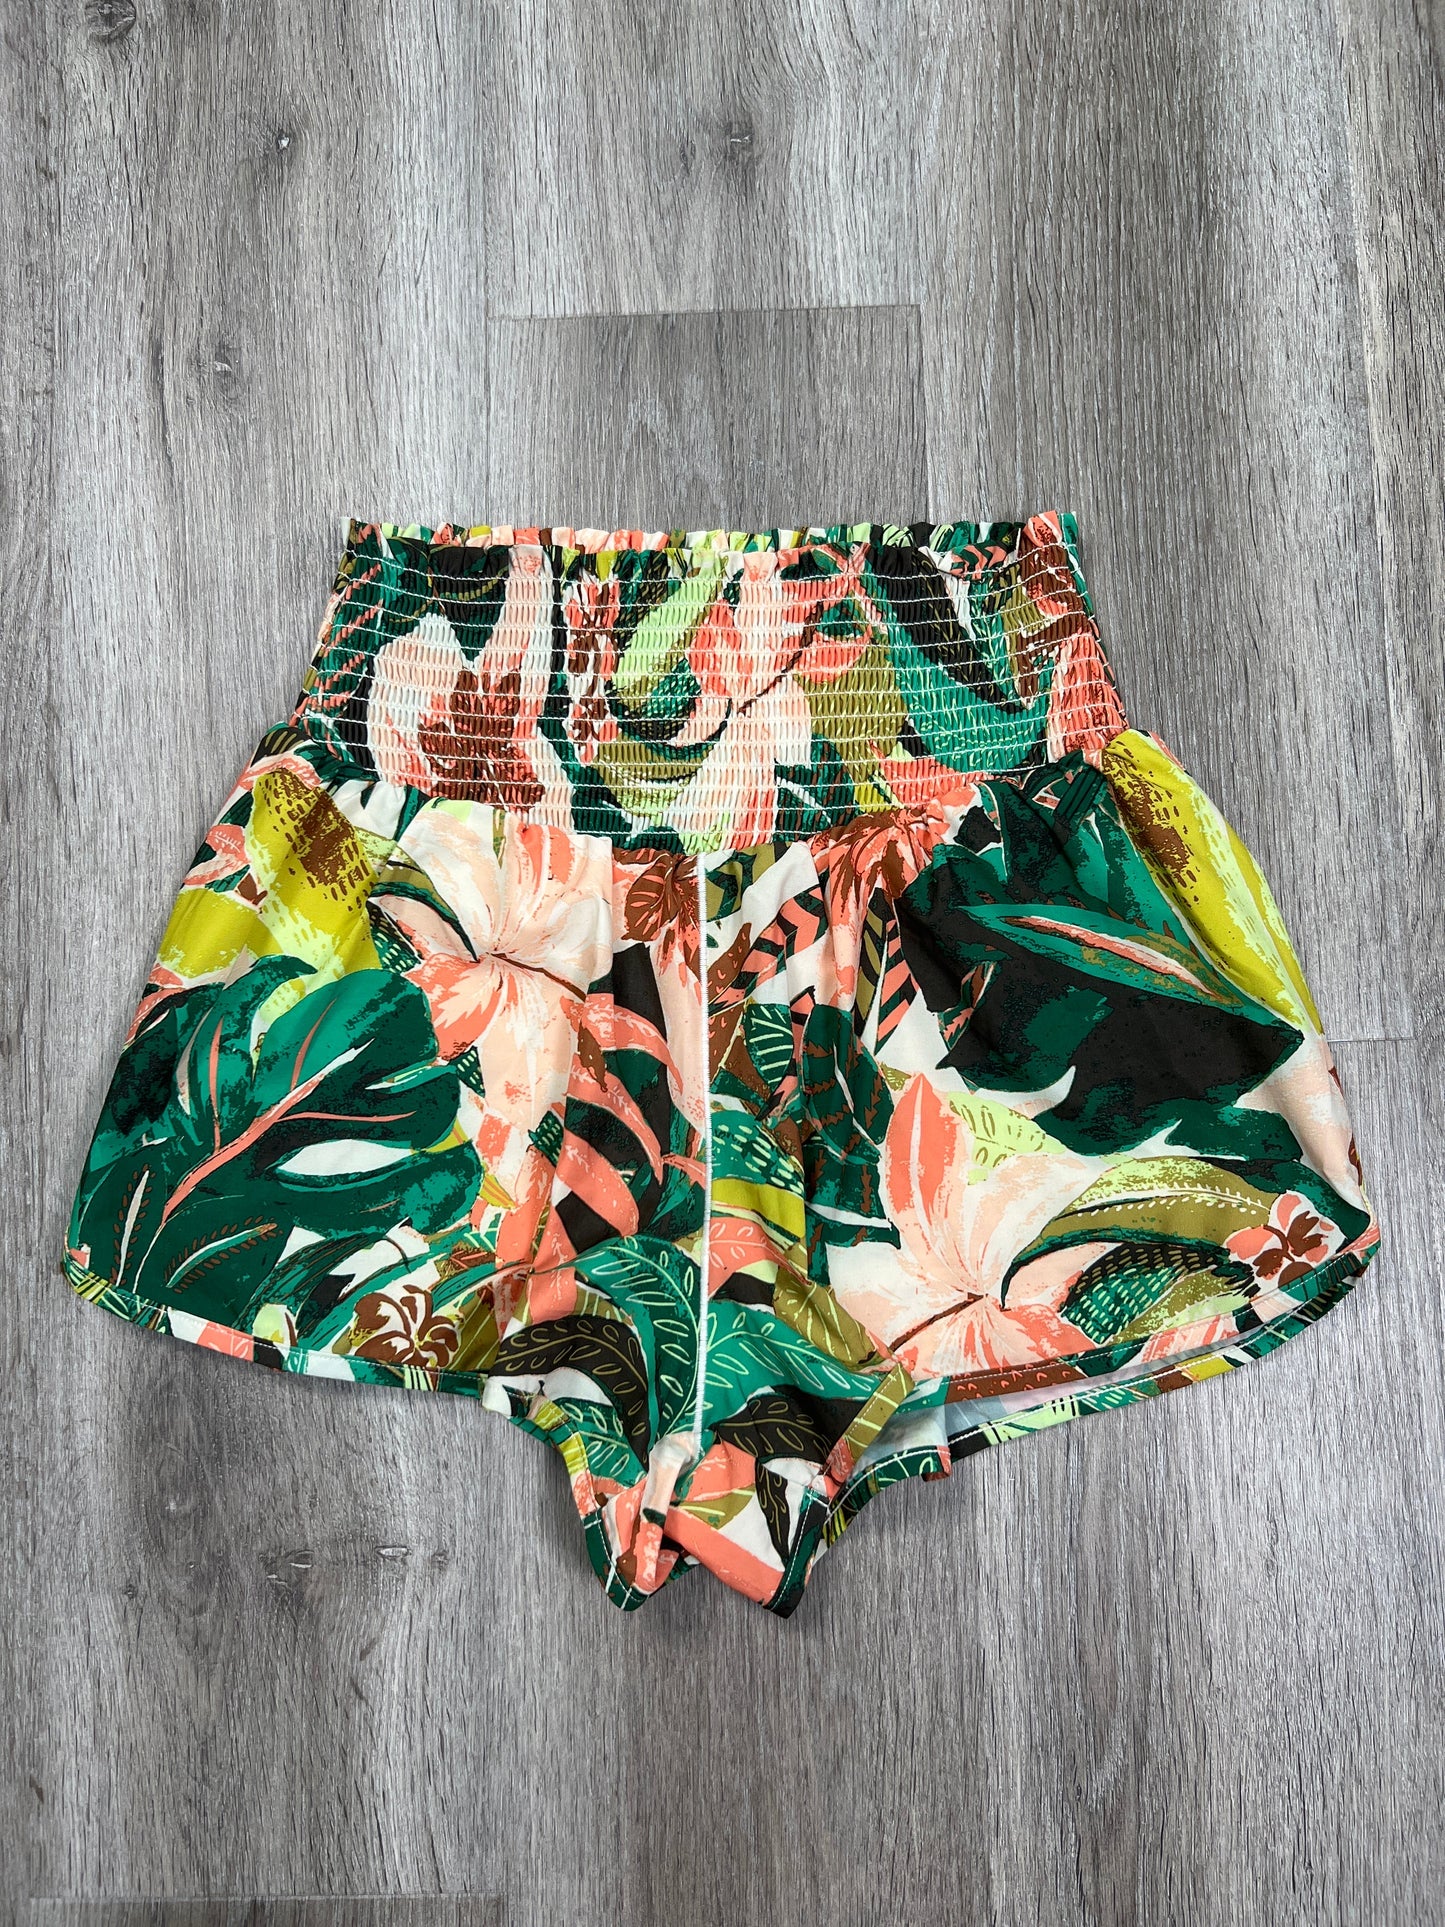 Tropical Print Athletic Shorts Aerie, Size M